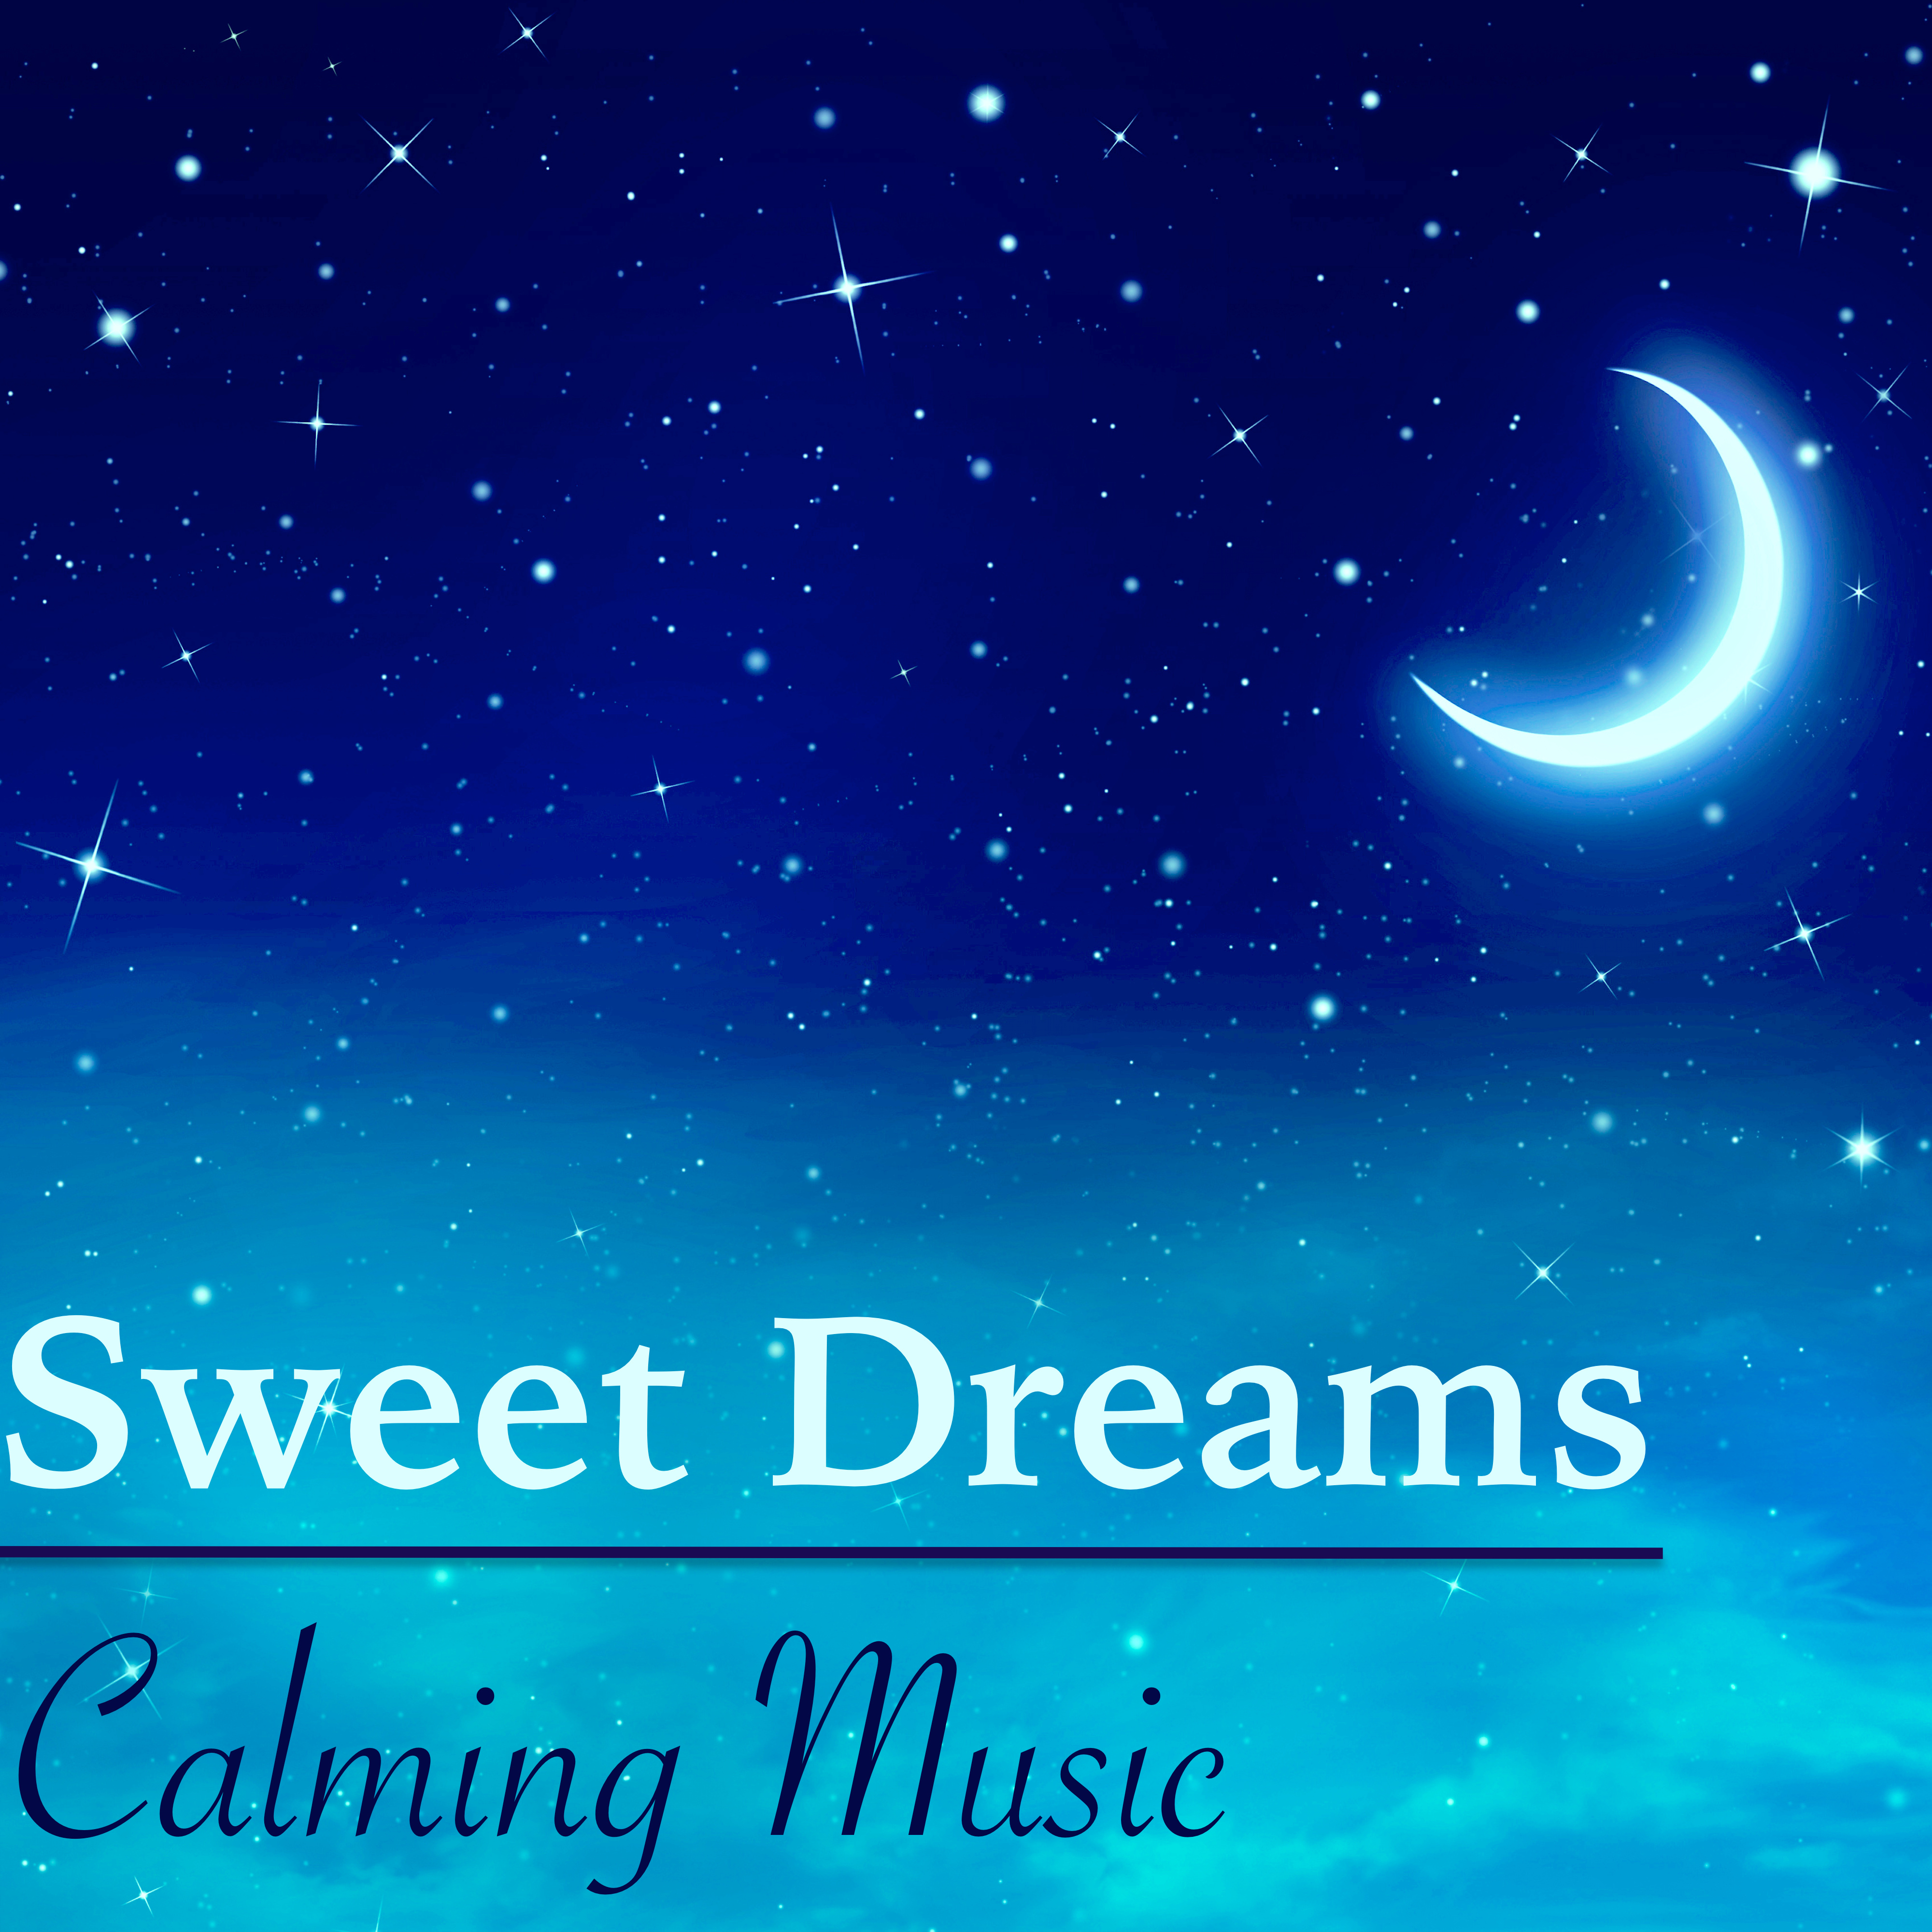 Sweet Dreams: Calming Music and Sounds of Nature for Relaxation, Stress Relief & Sleep Well through the Night